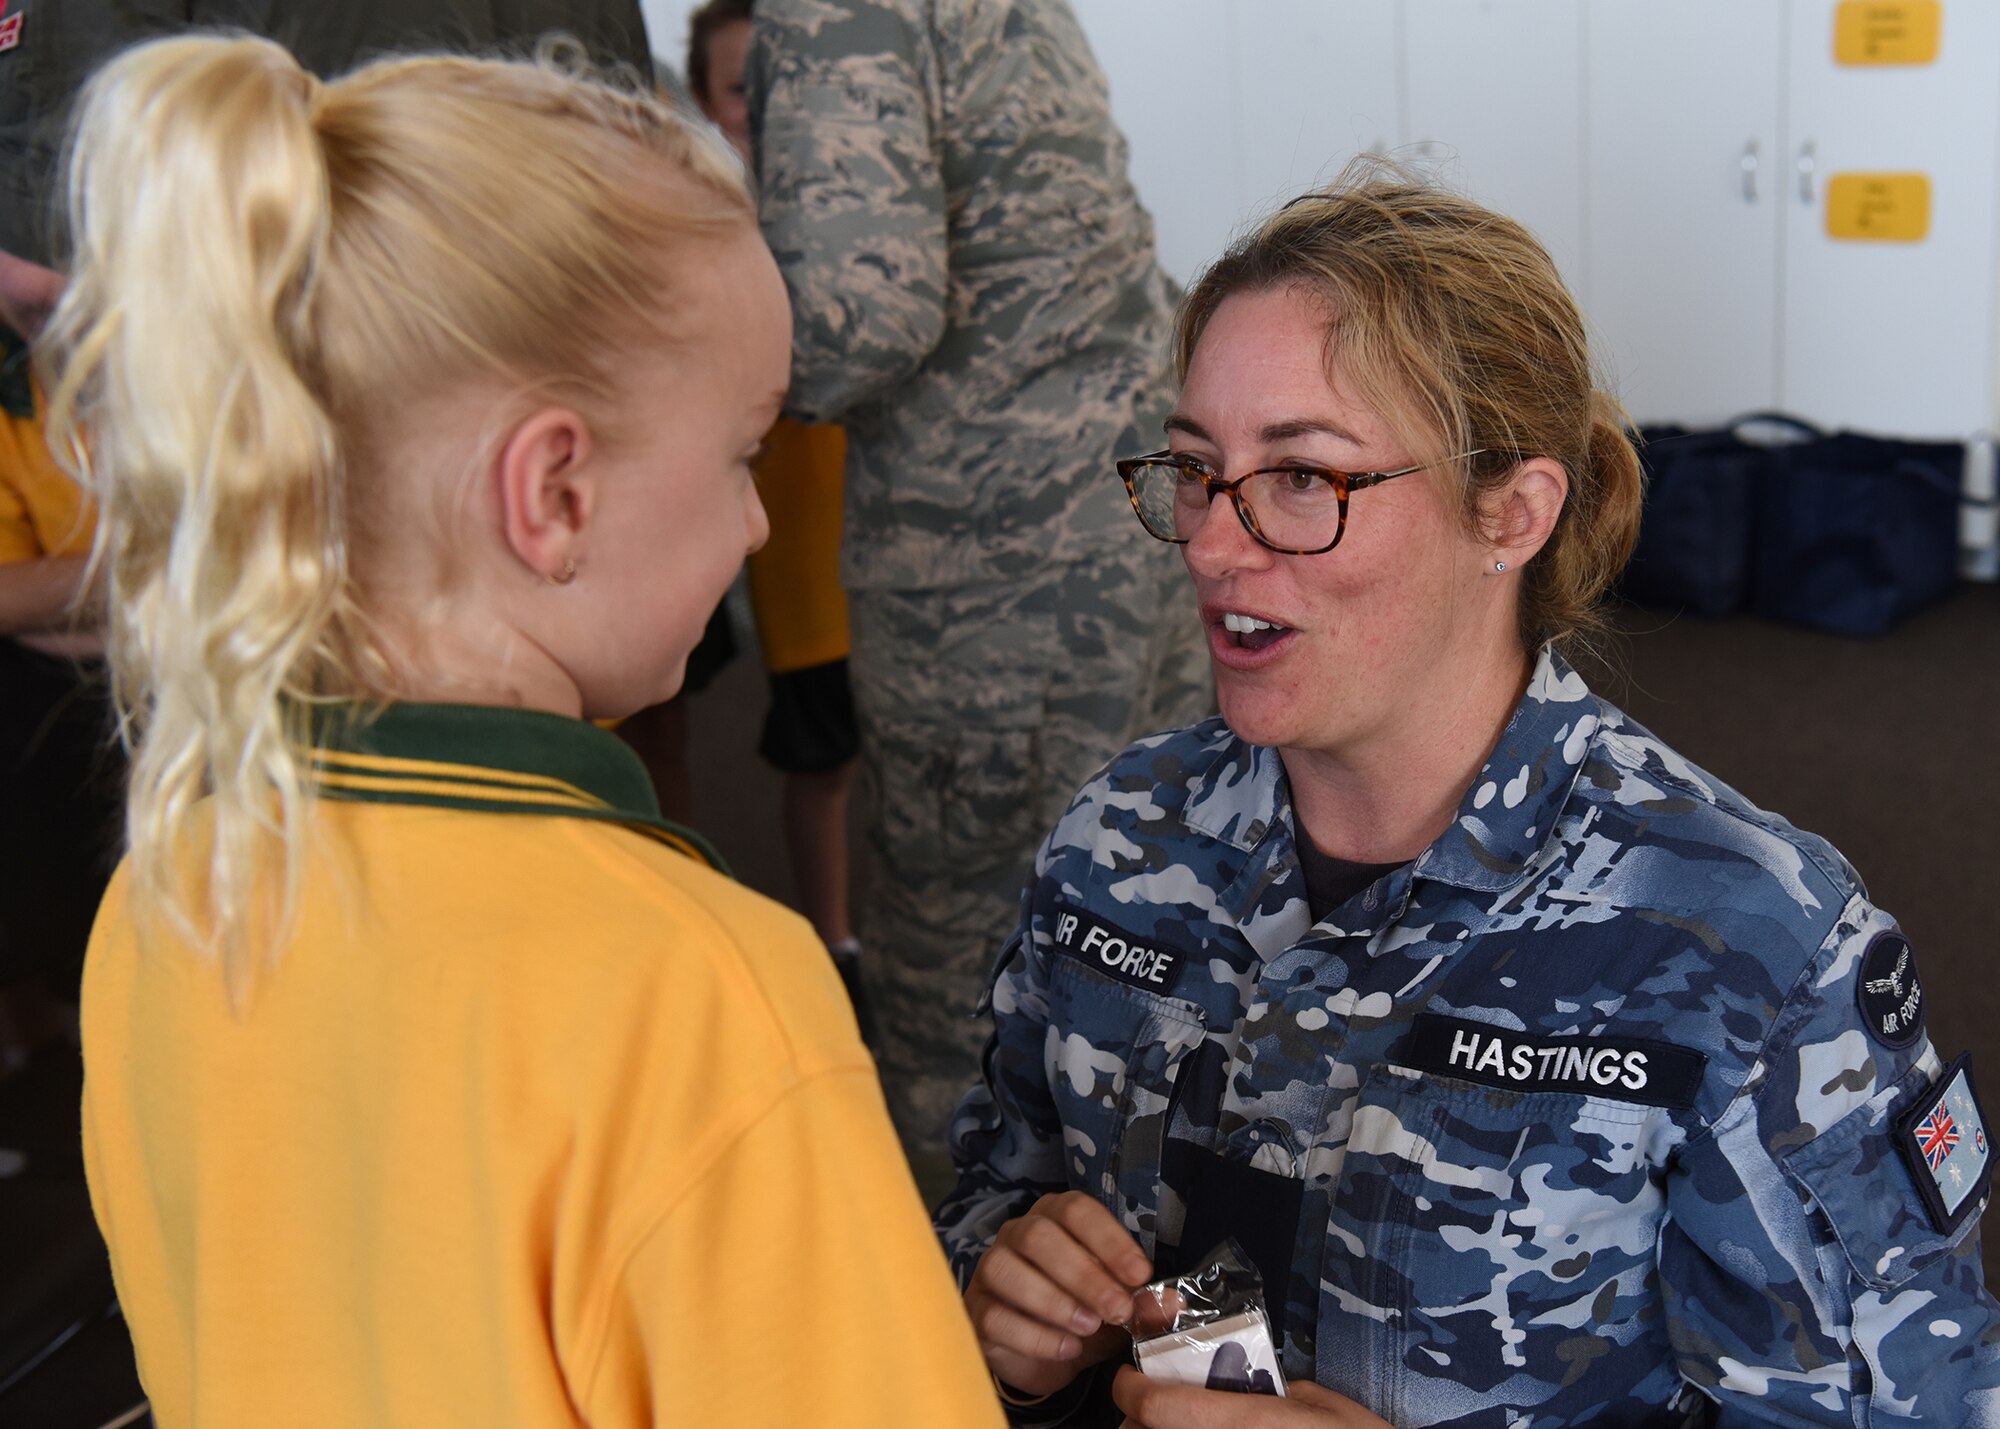 Royal Australian Air Force Flying Officer Claire Hastings, assigned to No. 28 Squadron, Her Majesty's Australian Ship Harman, Canberra, Australia, talks to Lara Primary School students in Geelong, Victoria, Australia, Feb. 26, 2019.